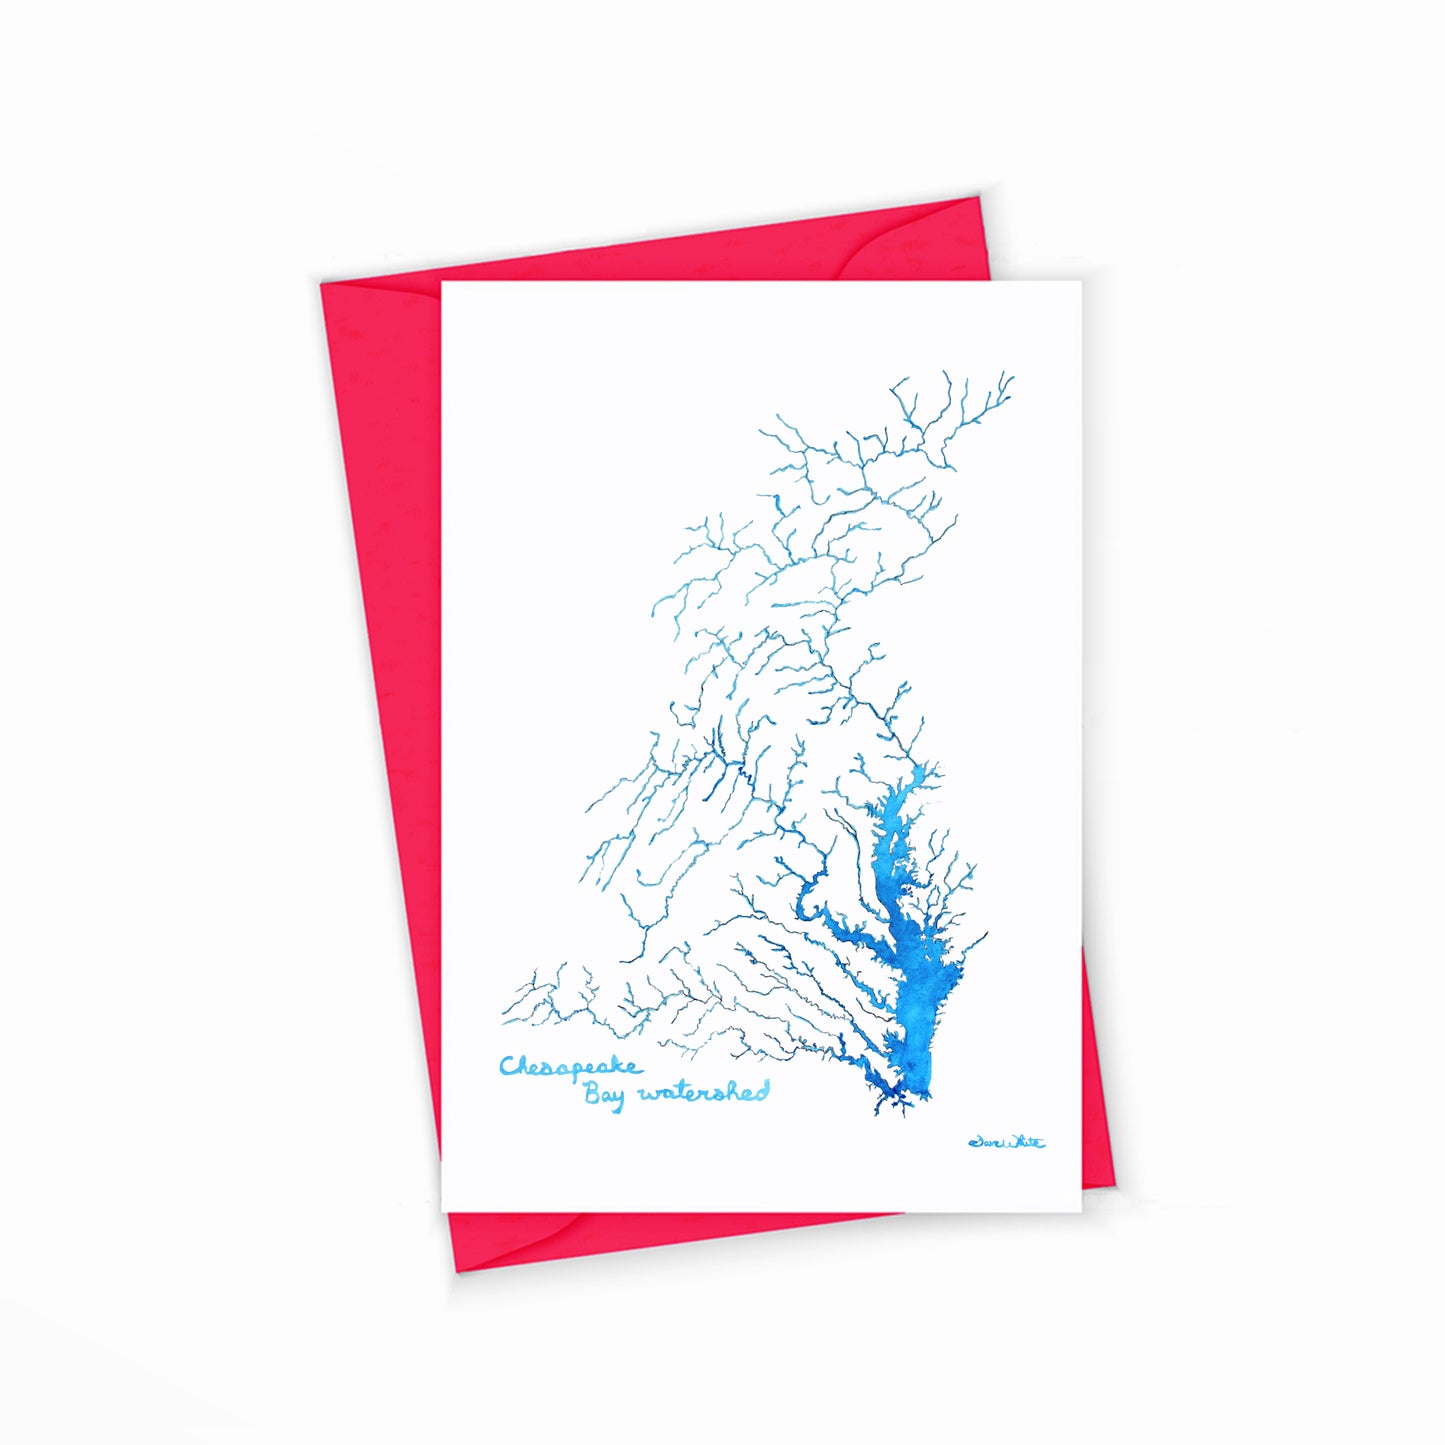 Greeting Card Chesapeake Bay Watershed Art by Artist Dave White